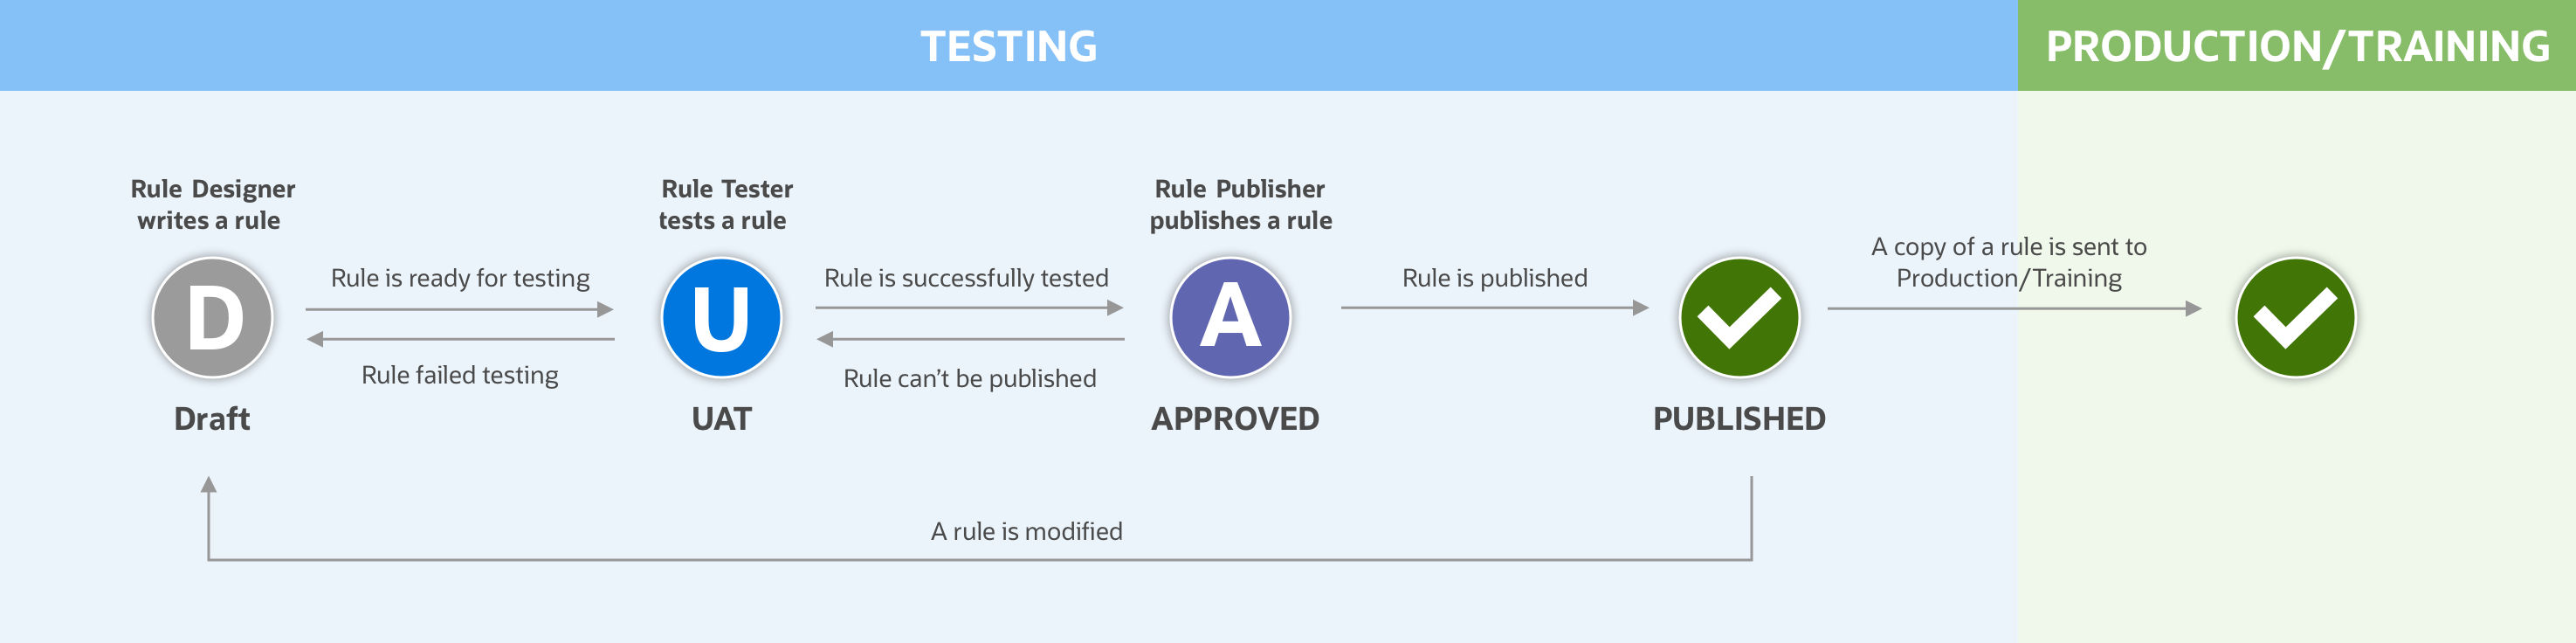 A rule's lifecycle starts in Testing mode where it needs to be drafted, tested, approved and published. Once published a rule is active in Production and Training mode.